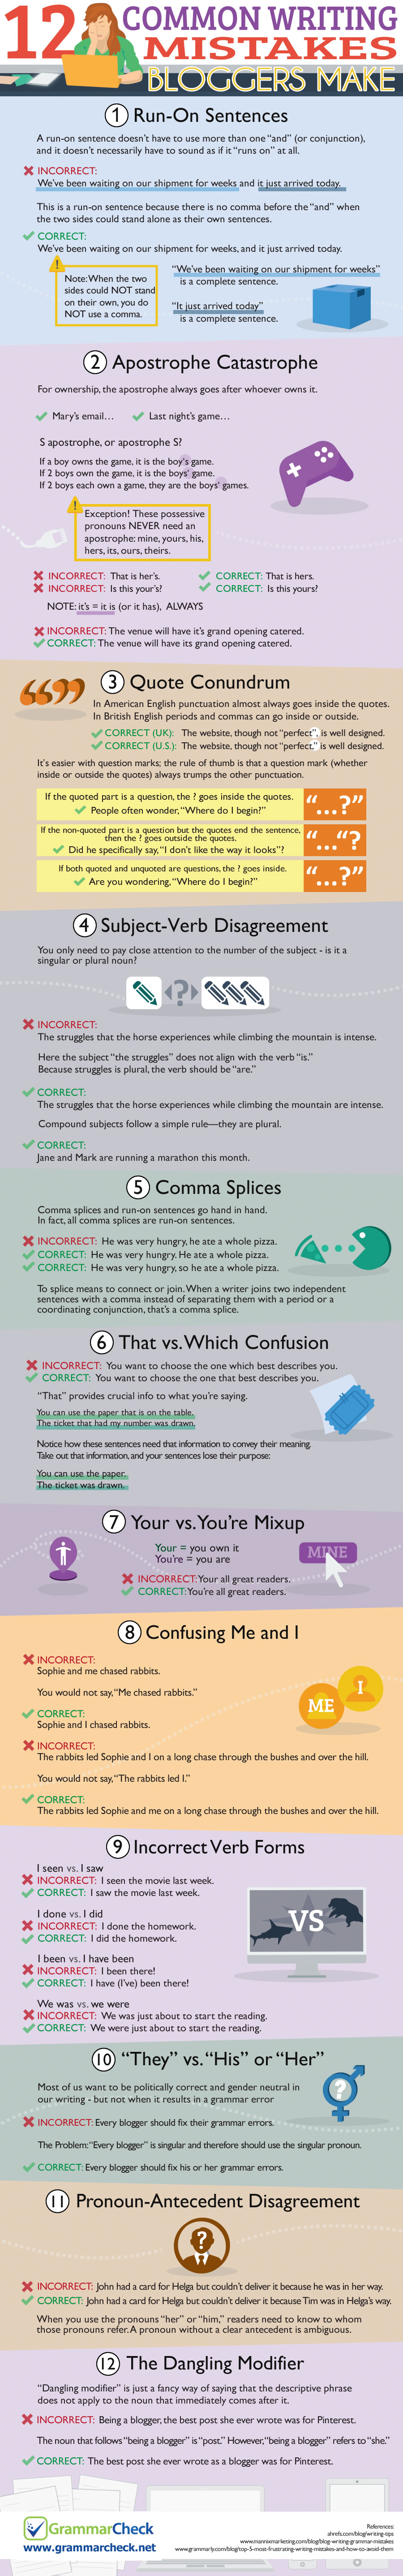 12 Common Writing Mistakes Bloggers Make (Infographic)